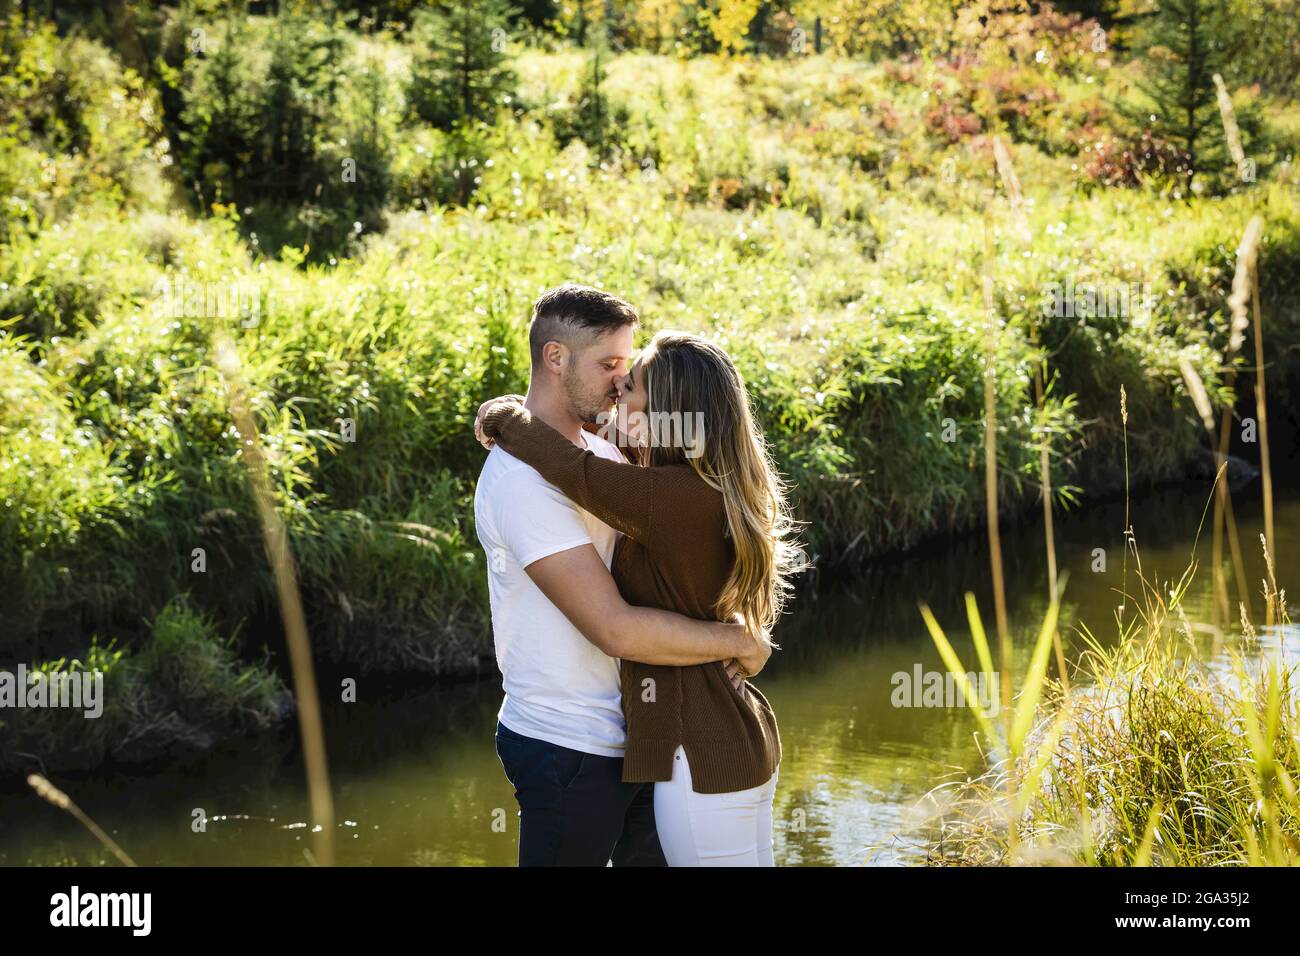 Husband and wife spending quality time together and kissing outdoors near a stream in a city park; Edmonton, Alberta, Canada Stock Photo